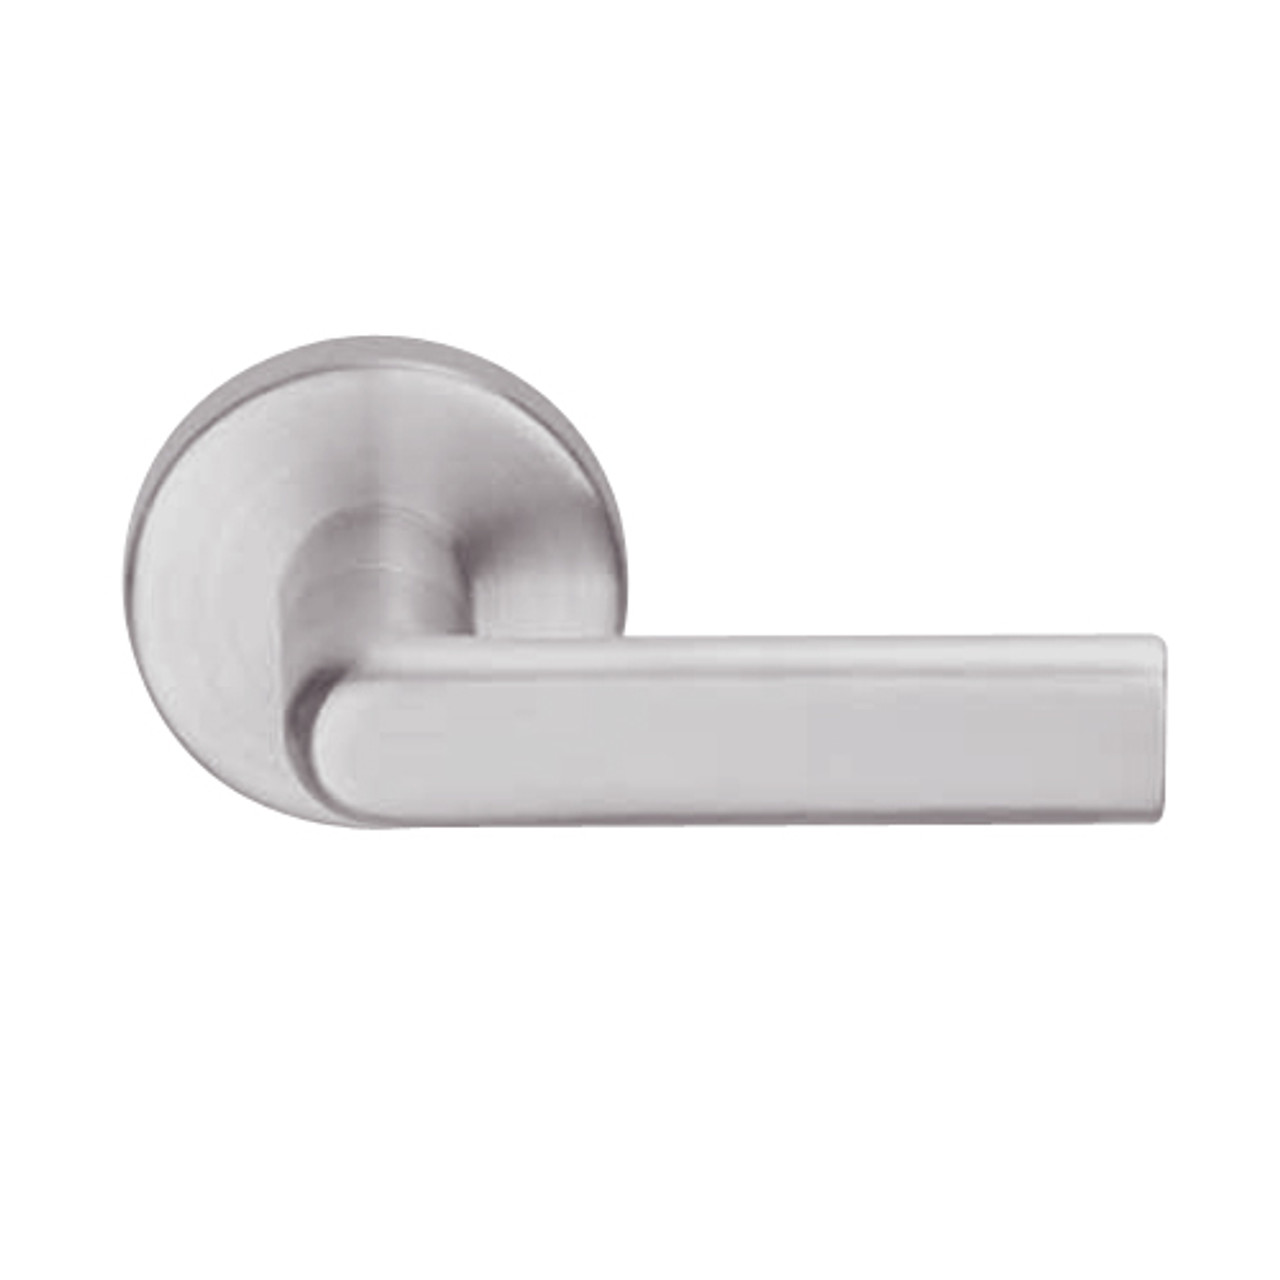 L9010-01B-630 Schlage L Series Passage Latch Commercial Mortise Lock with 01 Cast Lever Design in Satin Stainless Steel